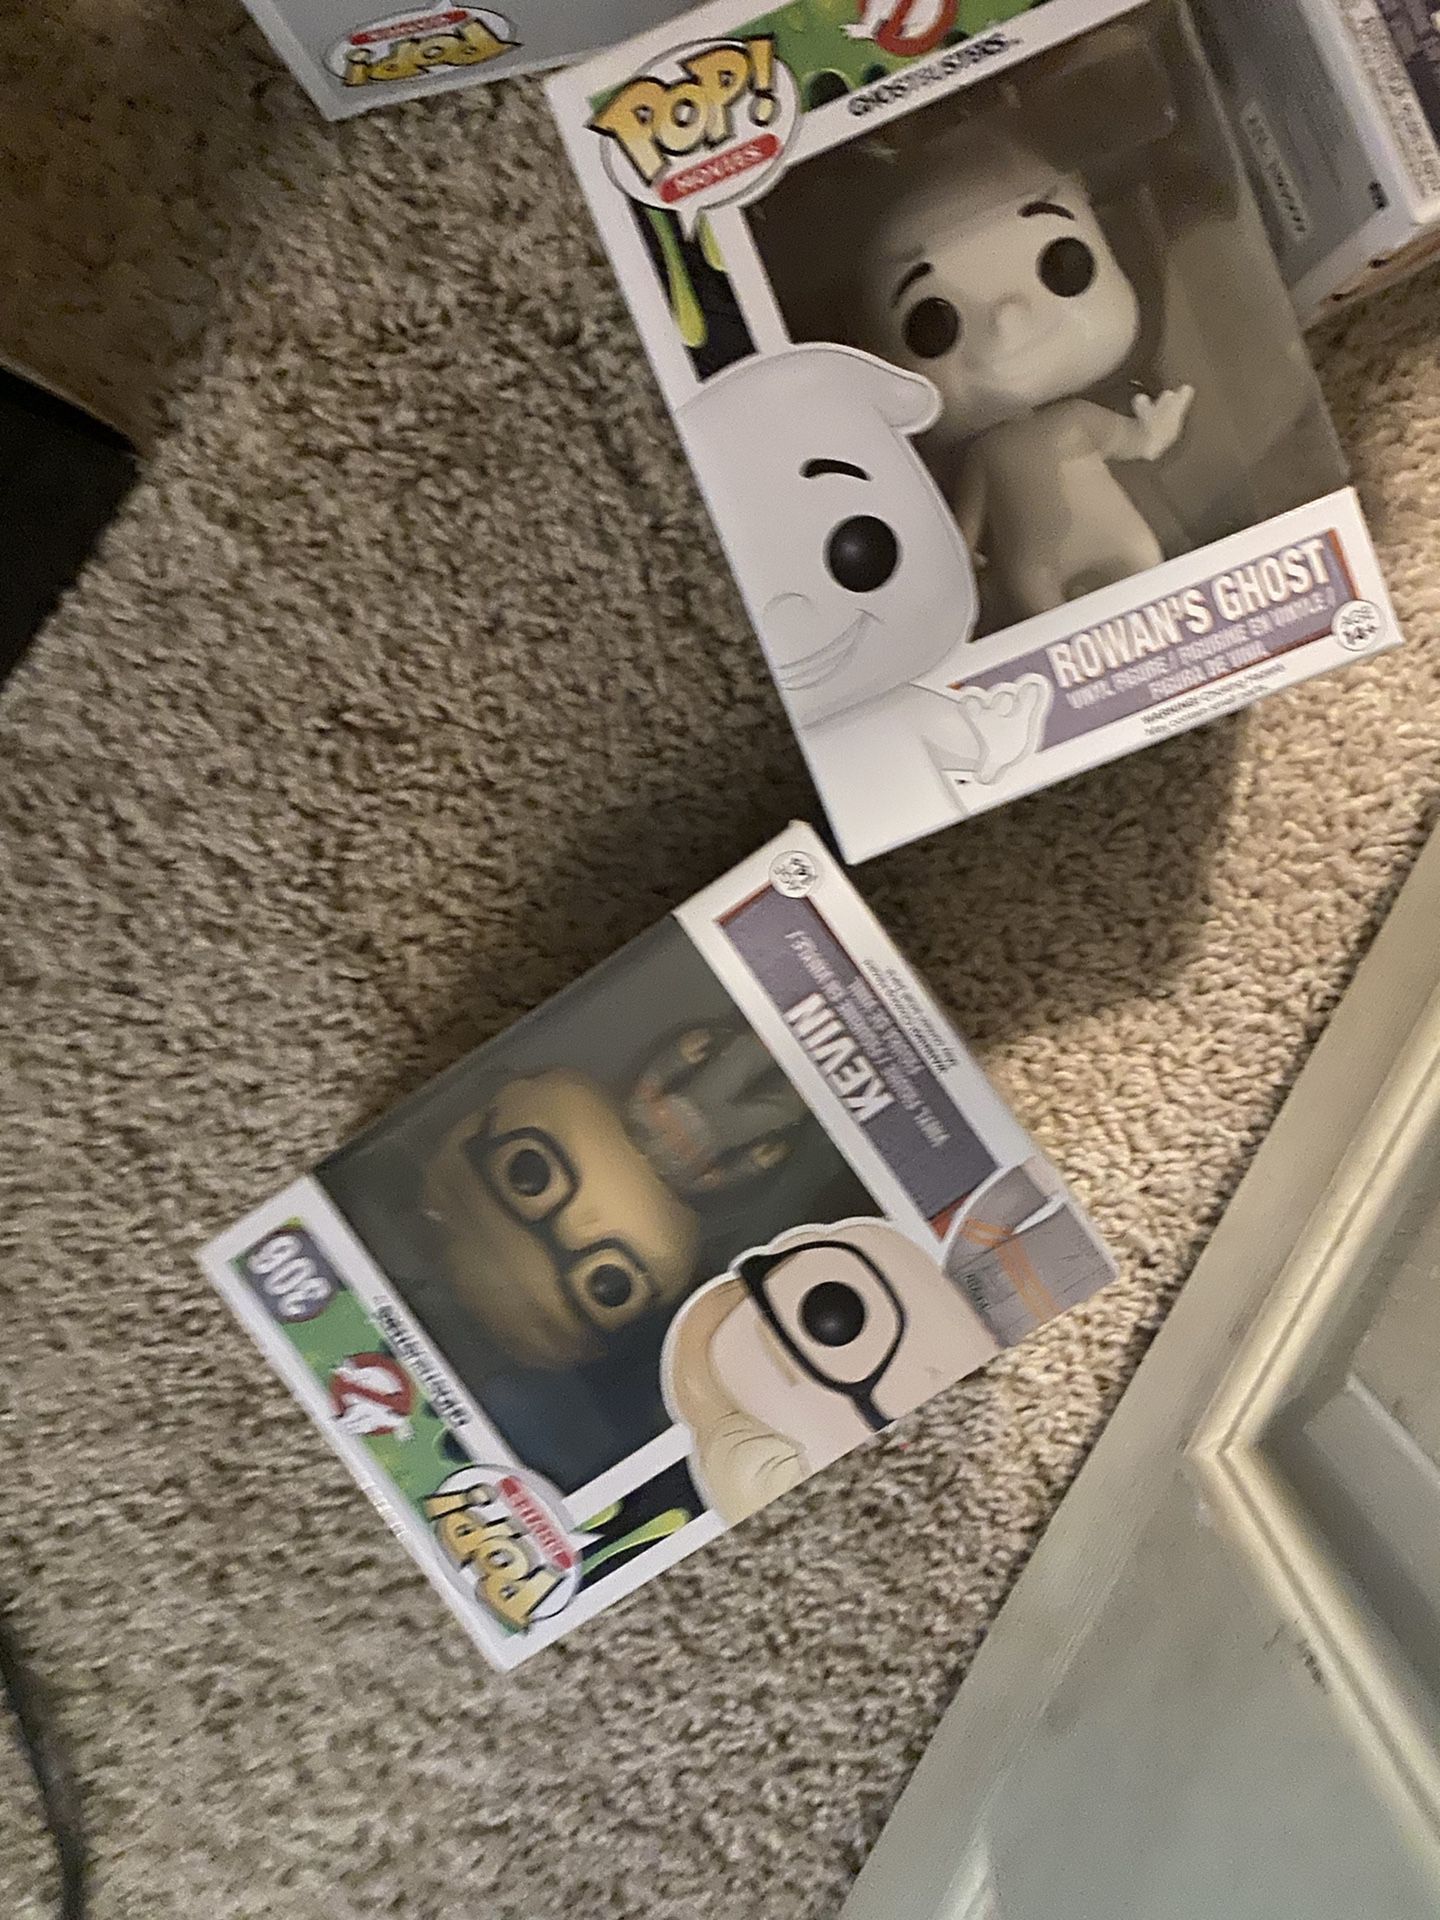 Ghost buster funkos